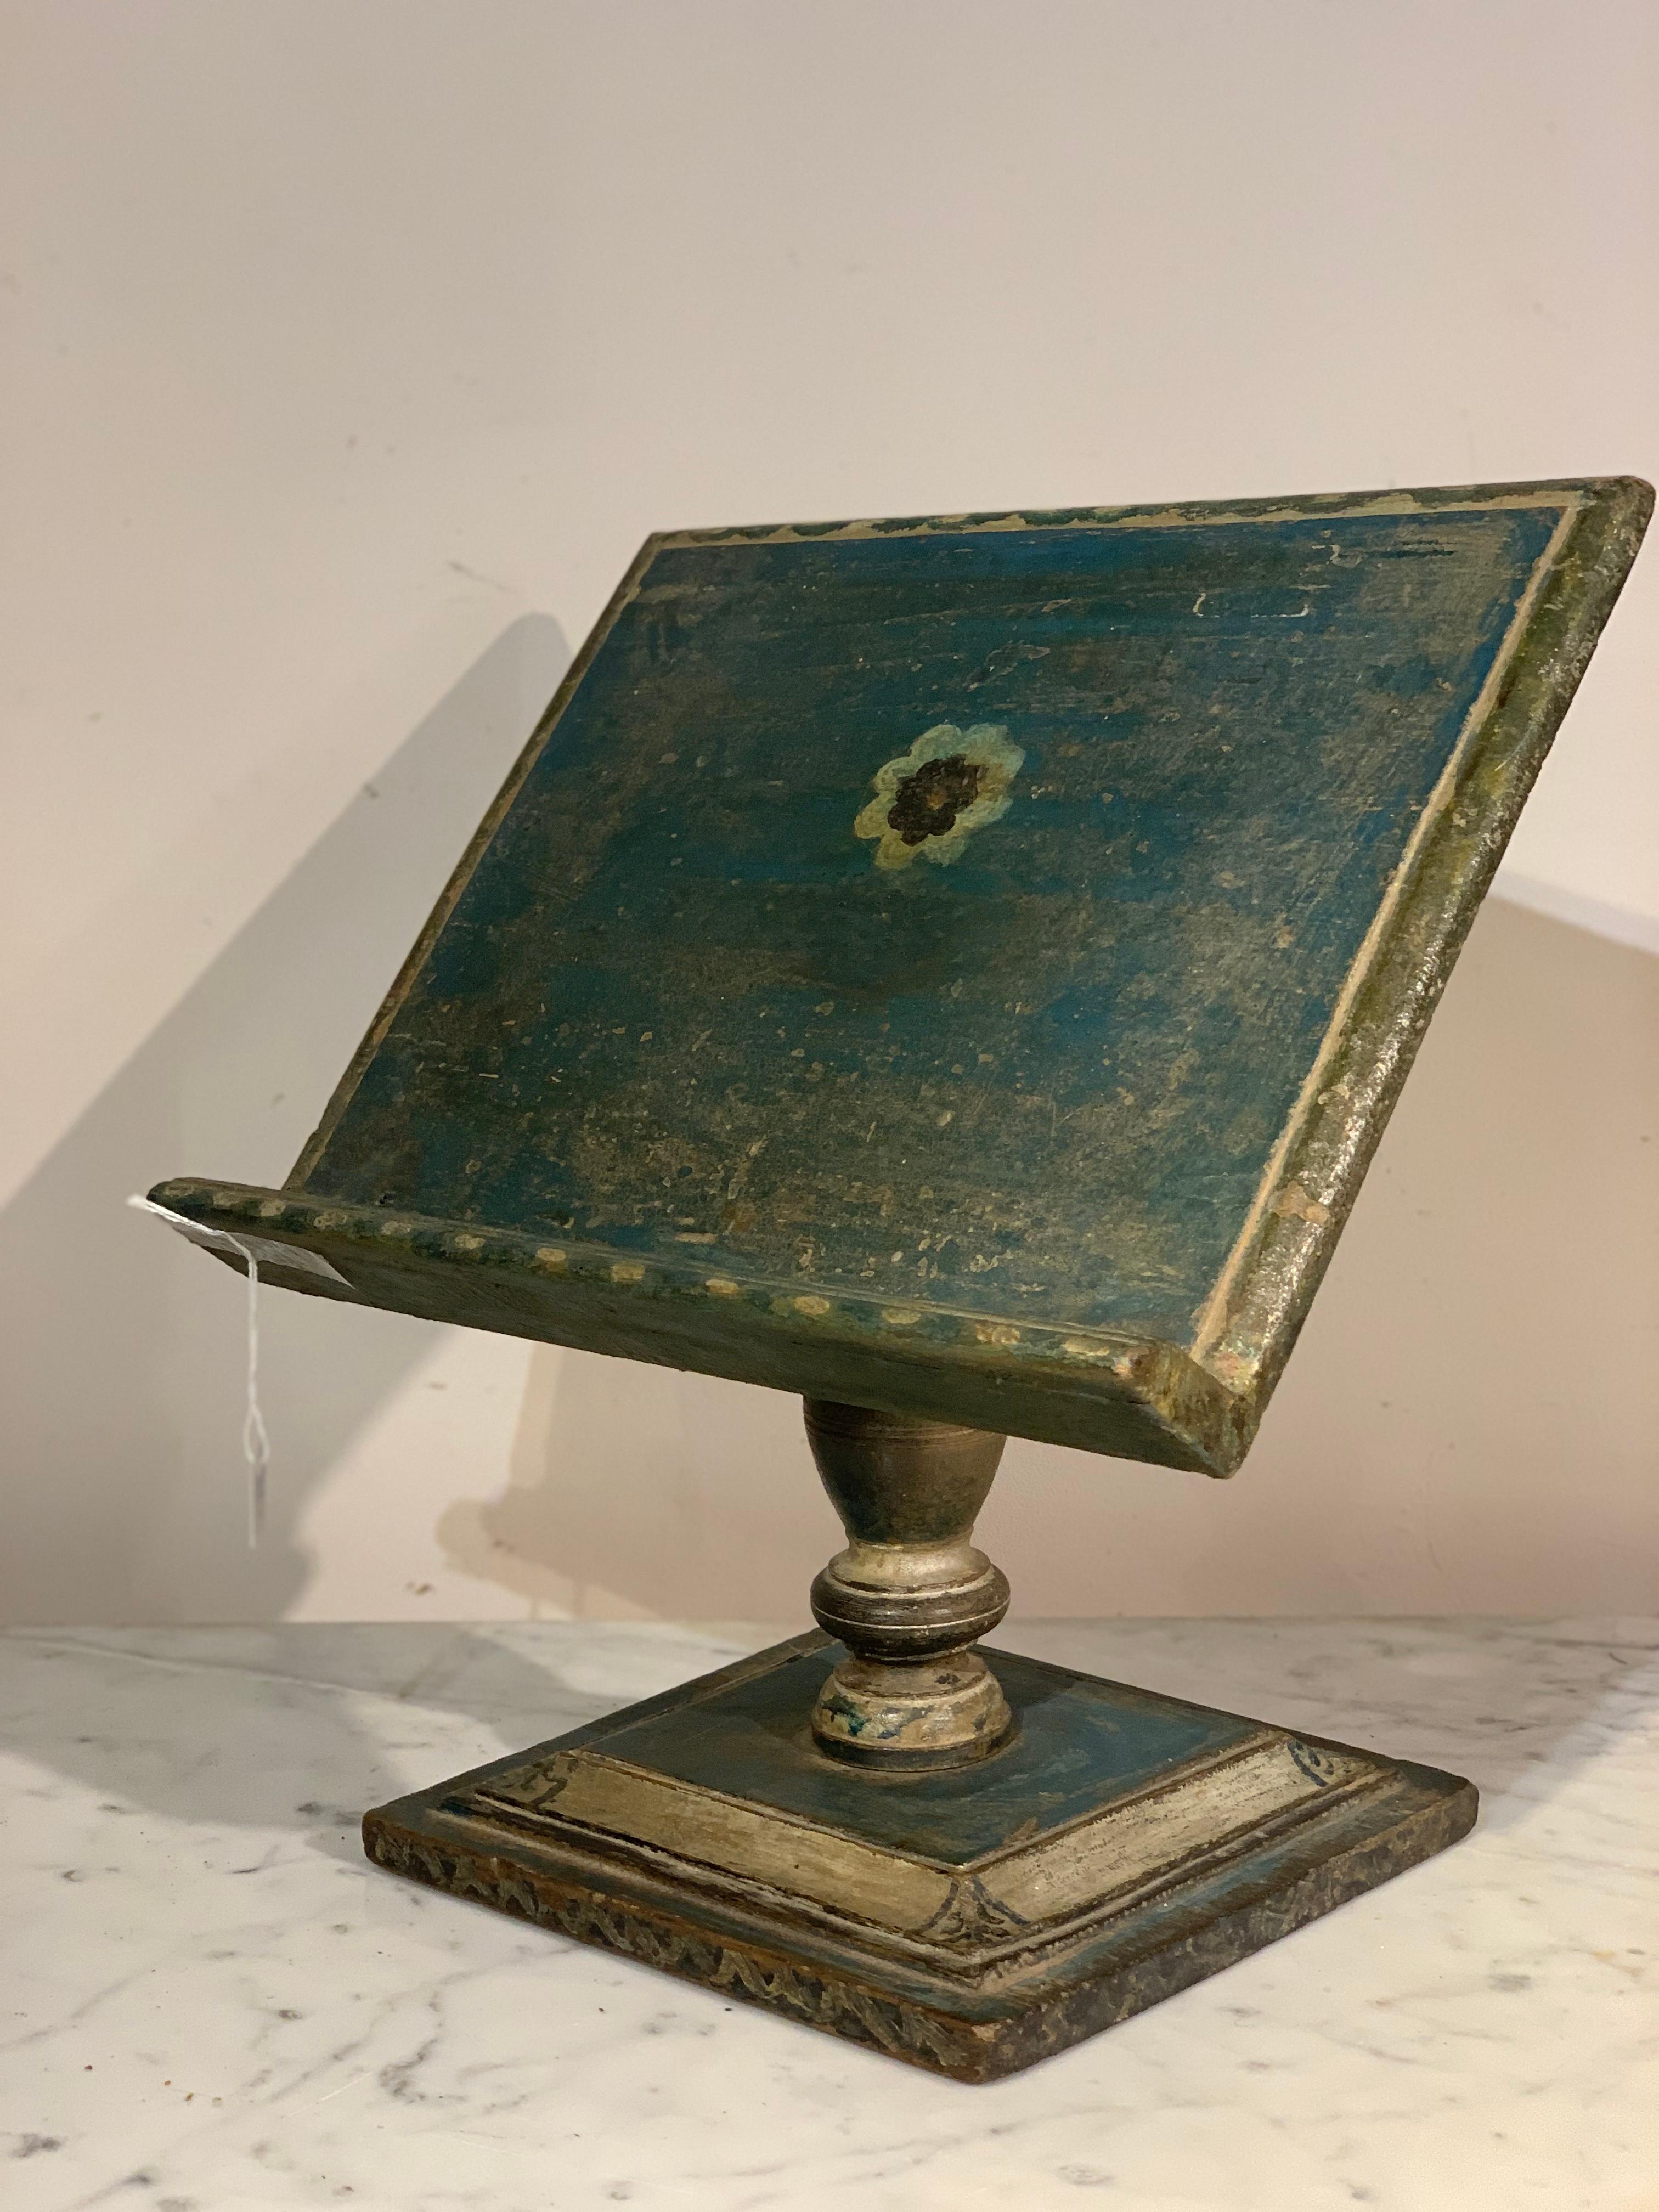 Rare book stand in lacquered wood, colors and decorations typical of the Italian neoclassicism, probably Vatican State 1790